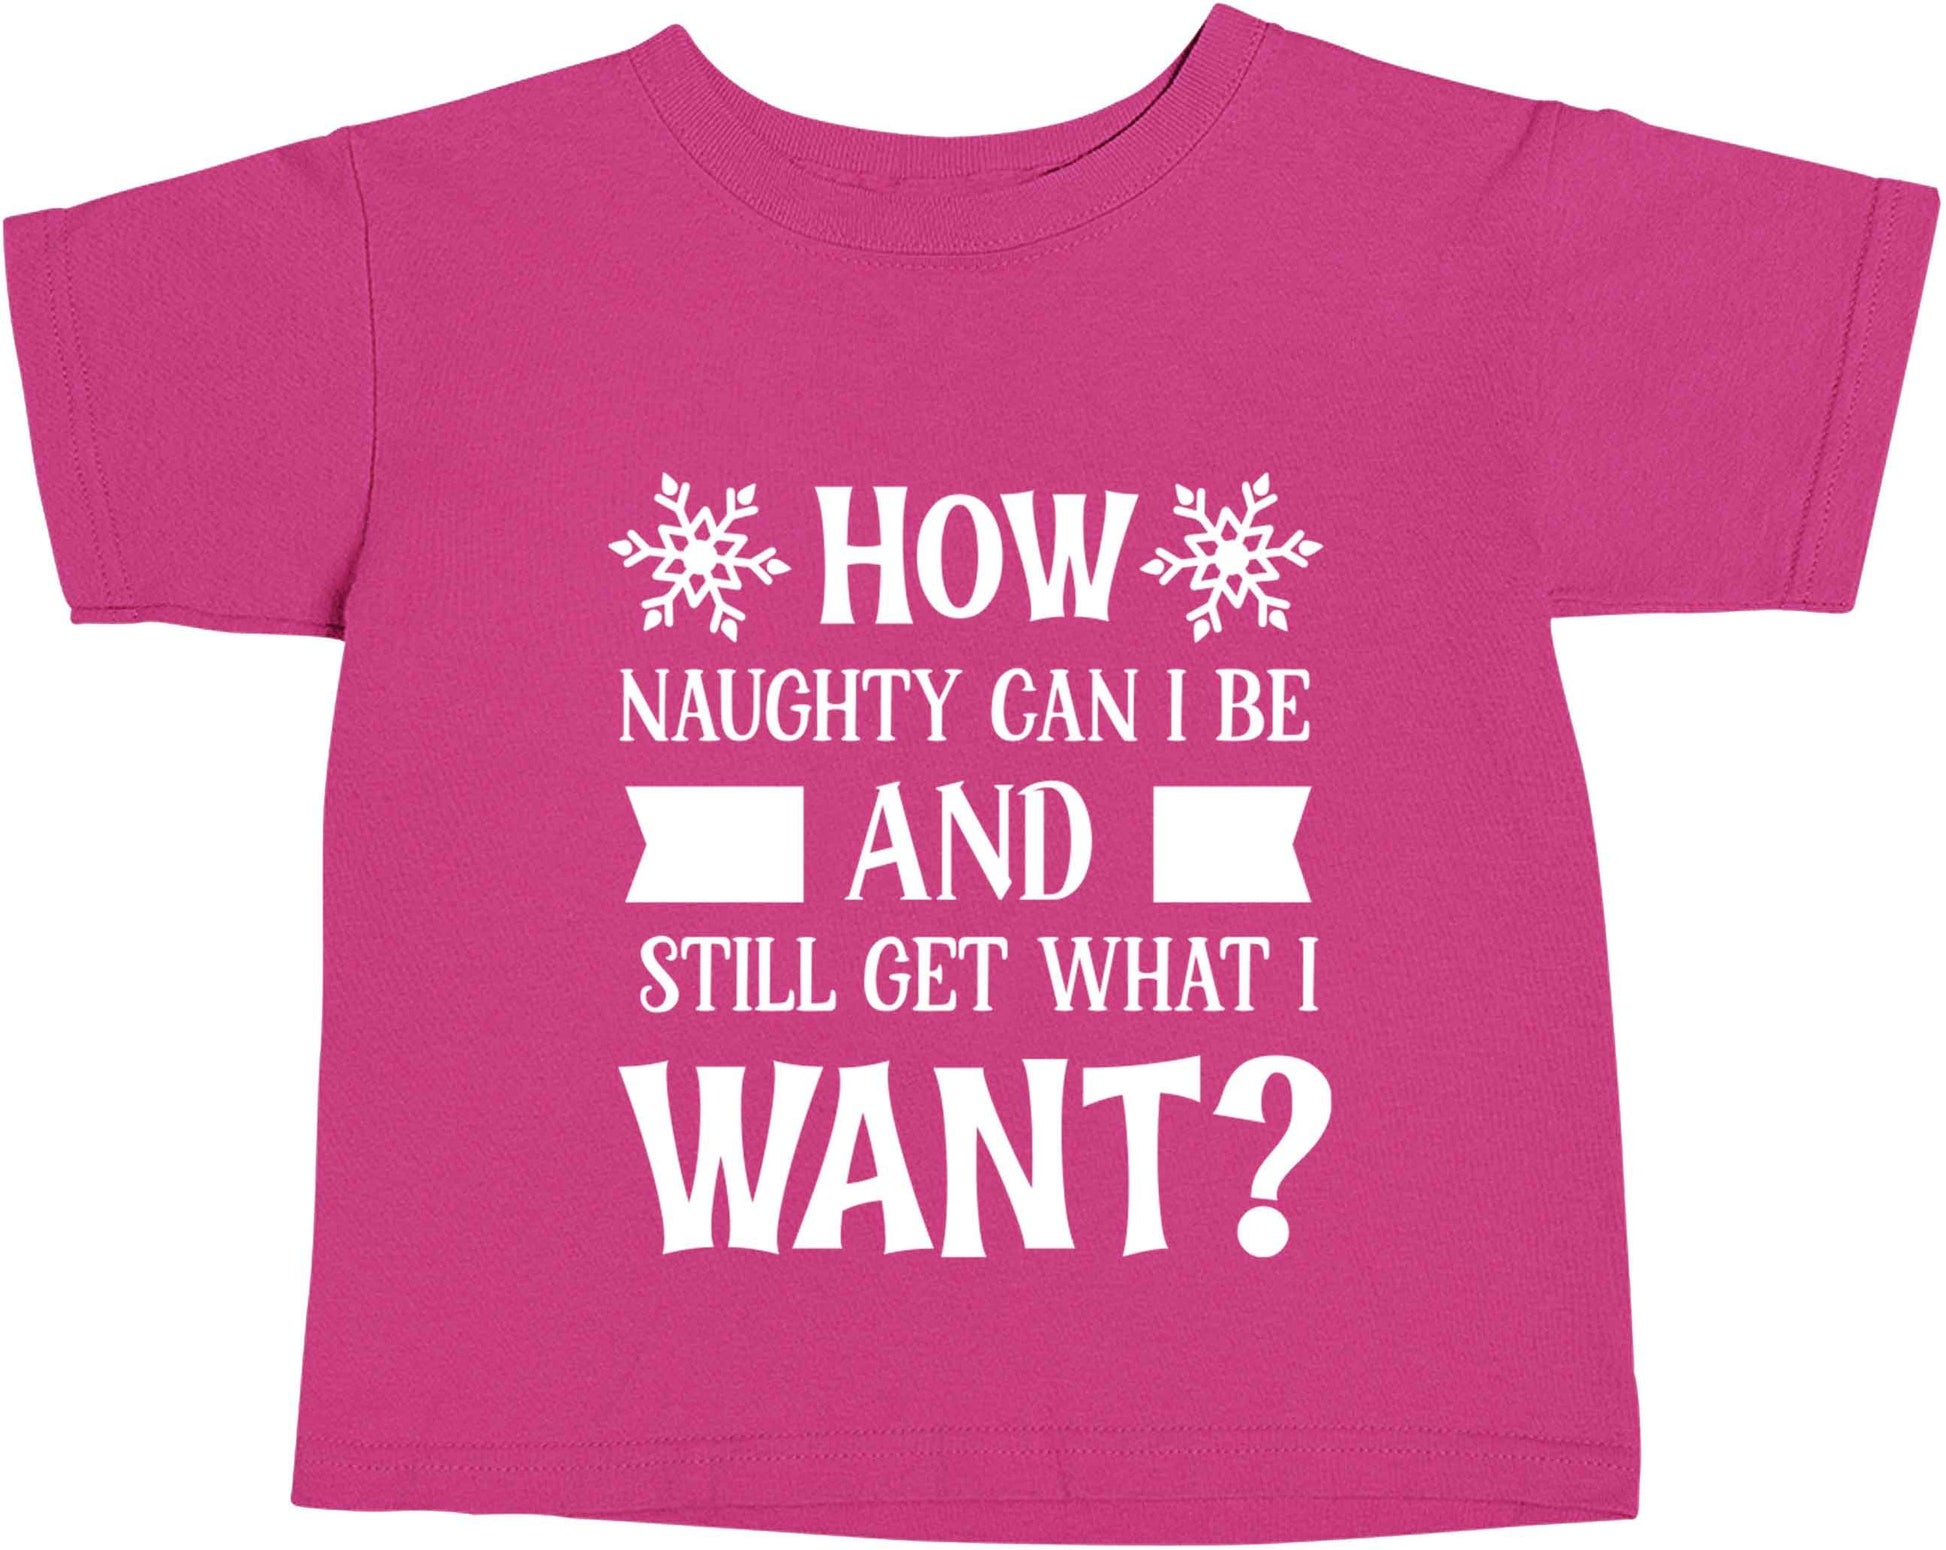 How naughty can I be and still get what I want? pink baby toddler Tshirt 2 Years